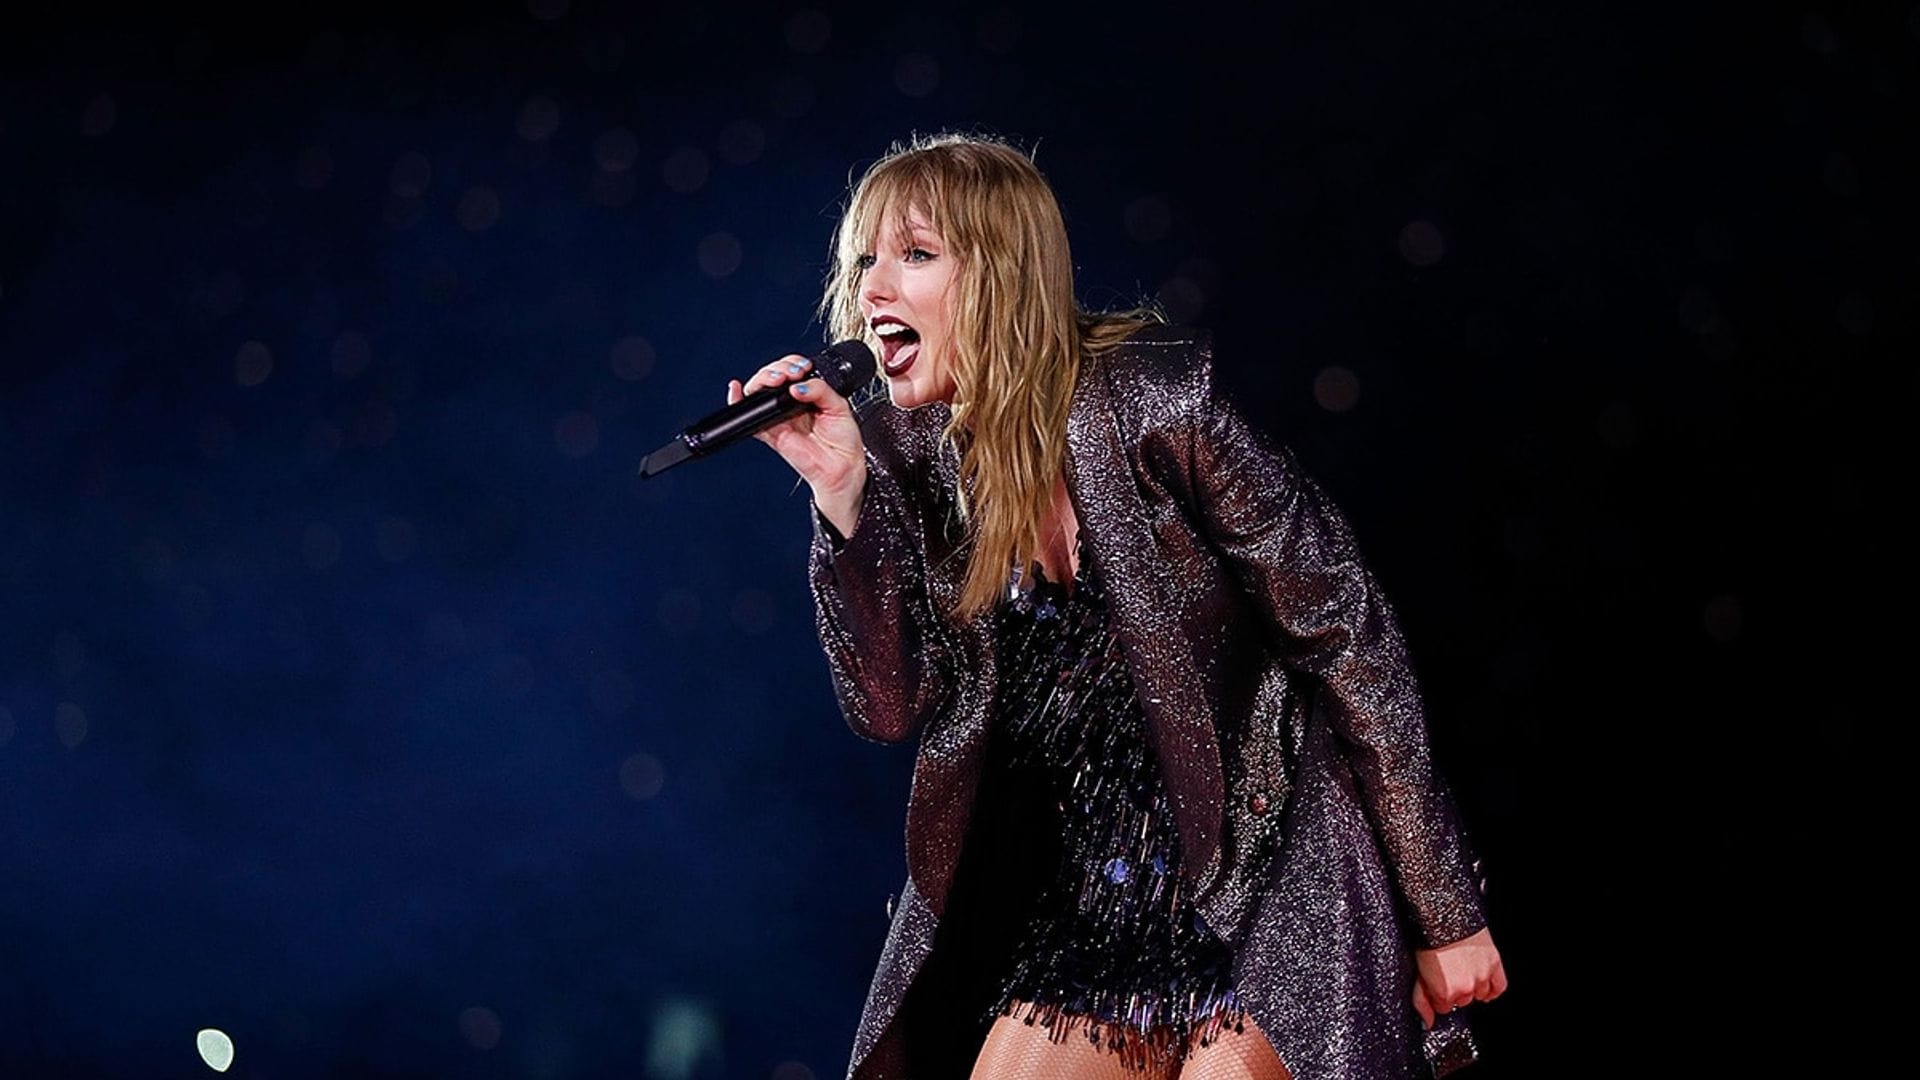 A history of who's been mentioned in Taylor Swift's biggest hits